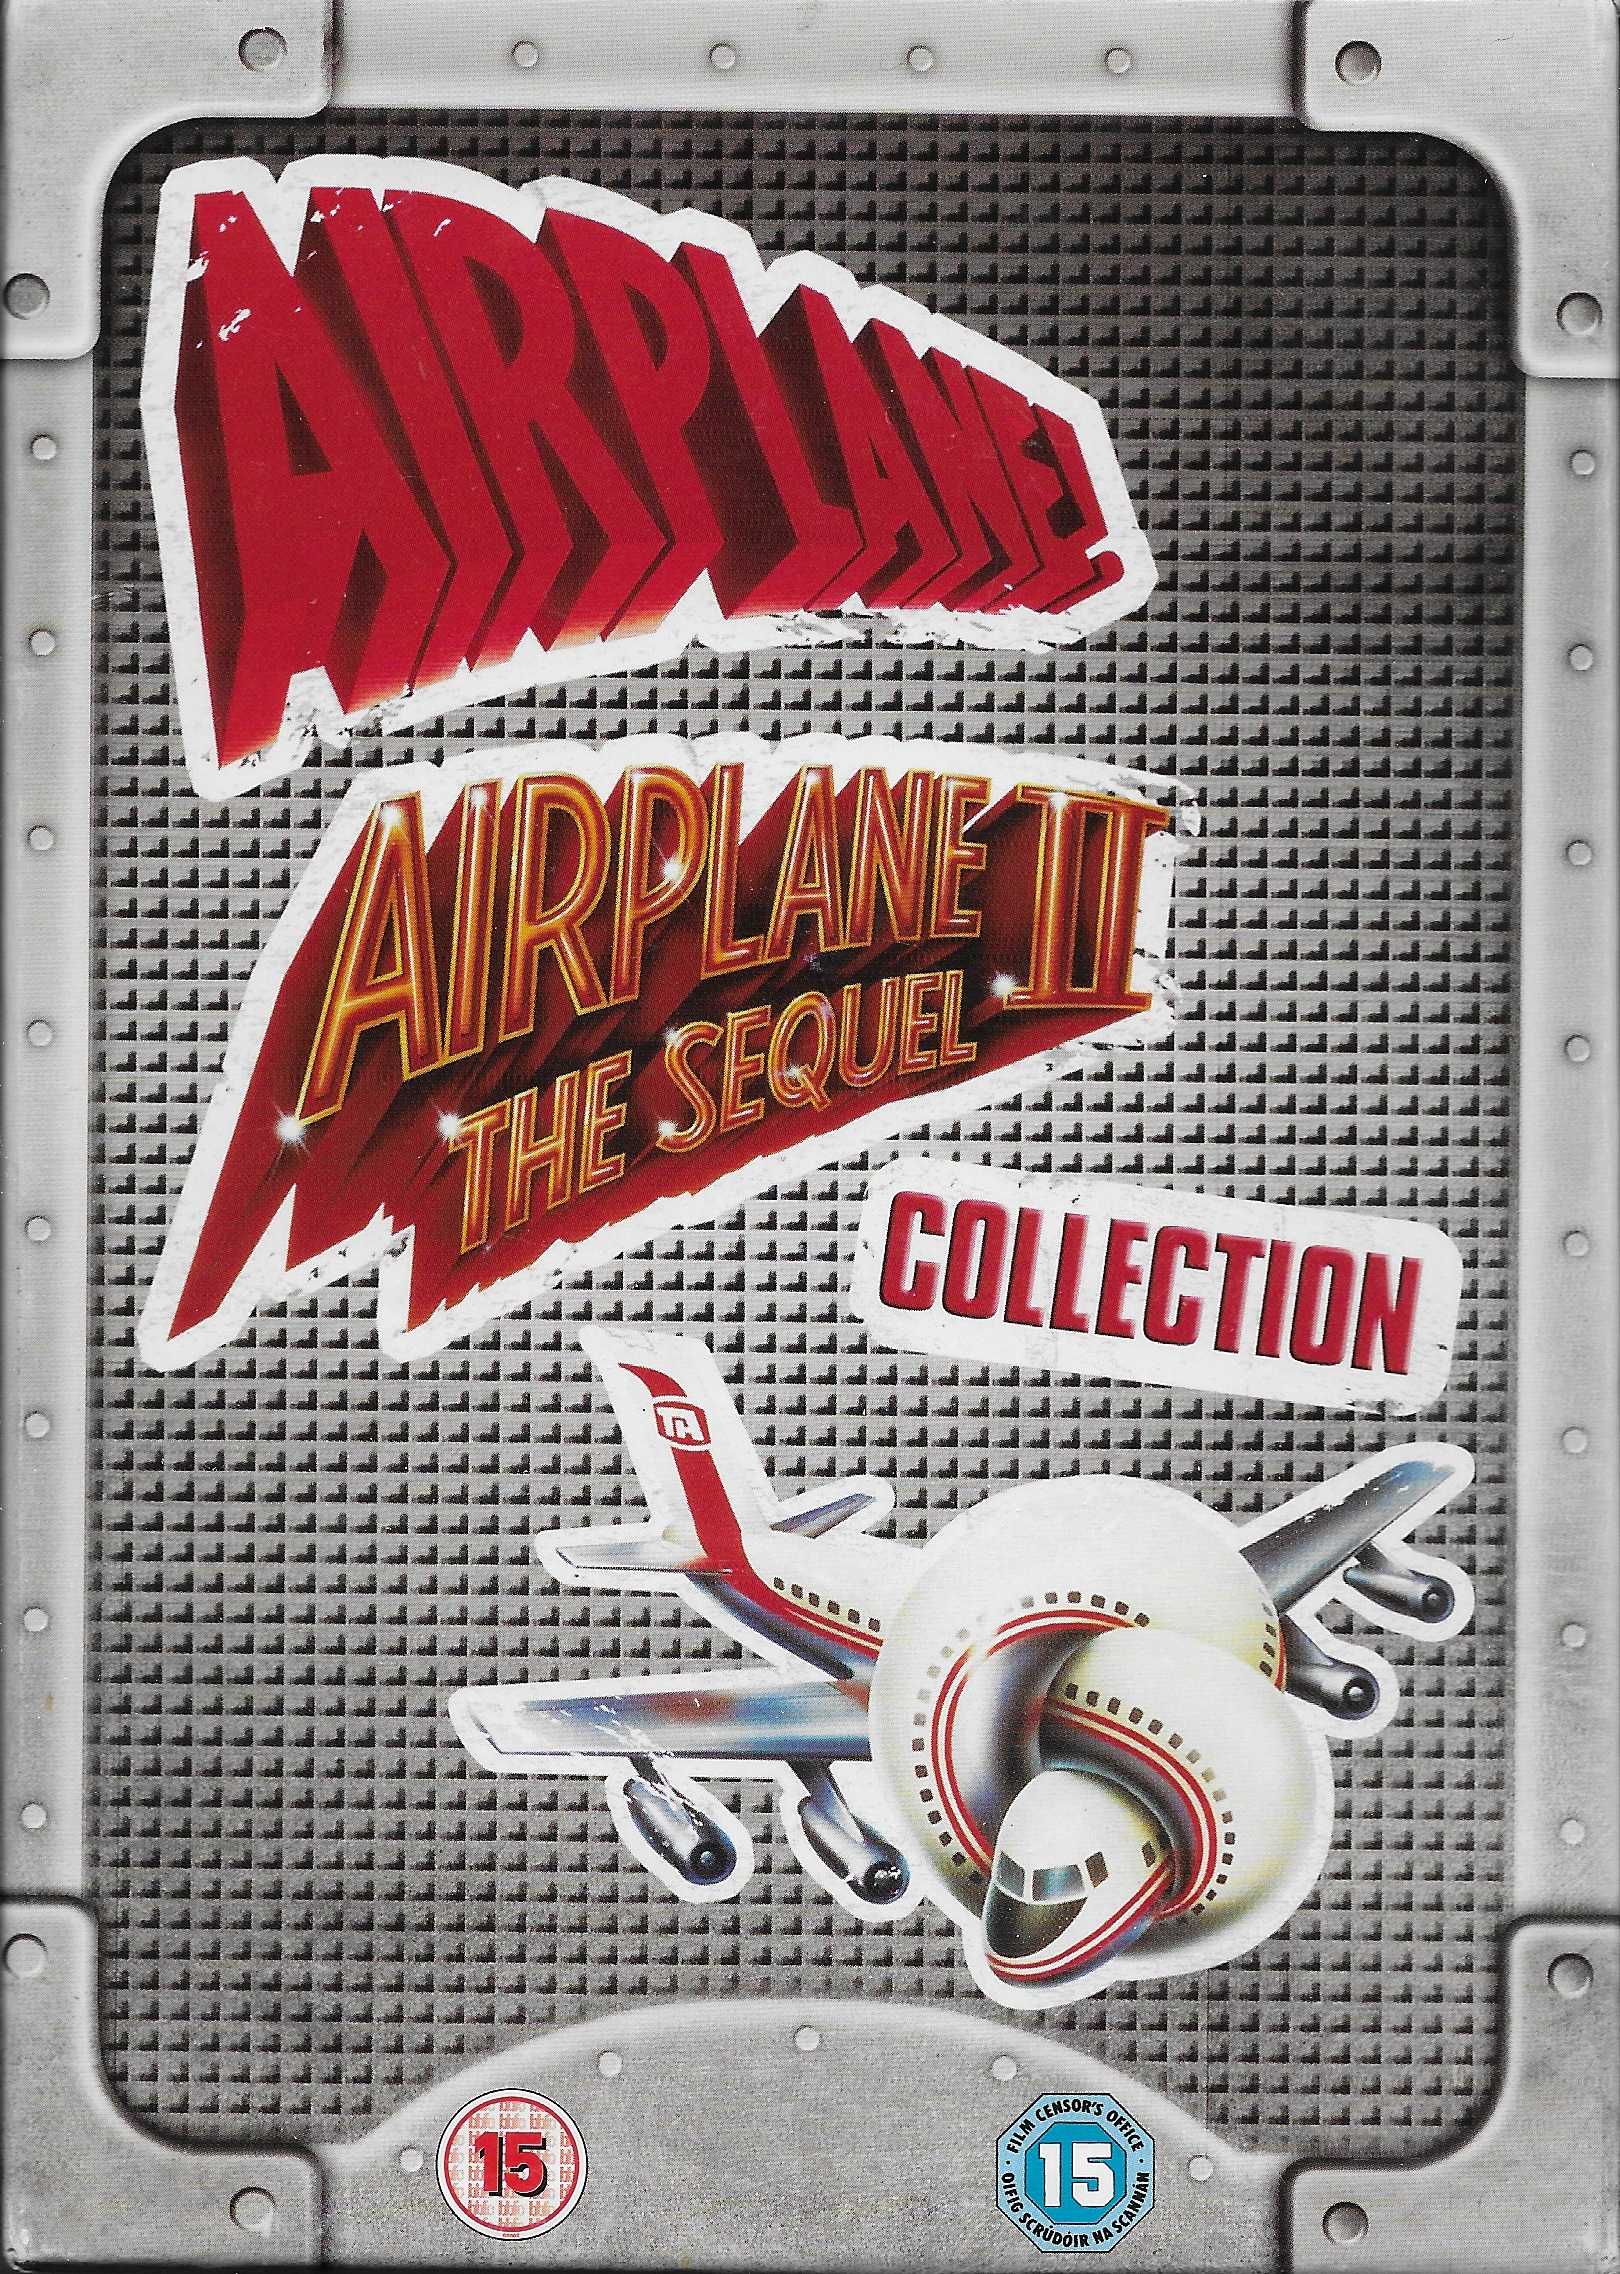 Picture of Airplane! Airplane II the sequel collection by artist Jim Abrahams / David Zucker / Jerry Zucker / Ken Finkleman from ITV, Channel 4 and Channel 5 dvds library